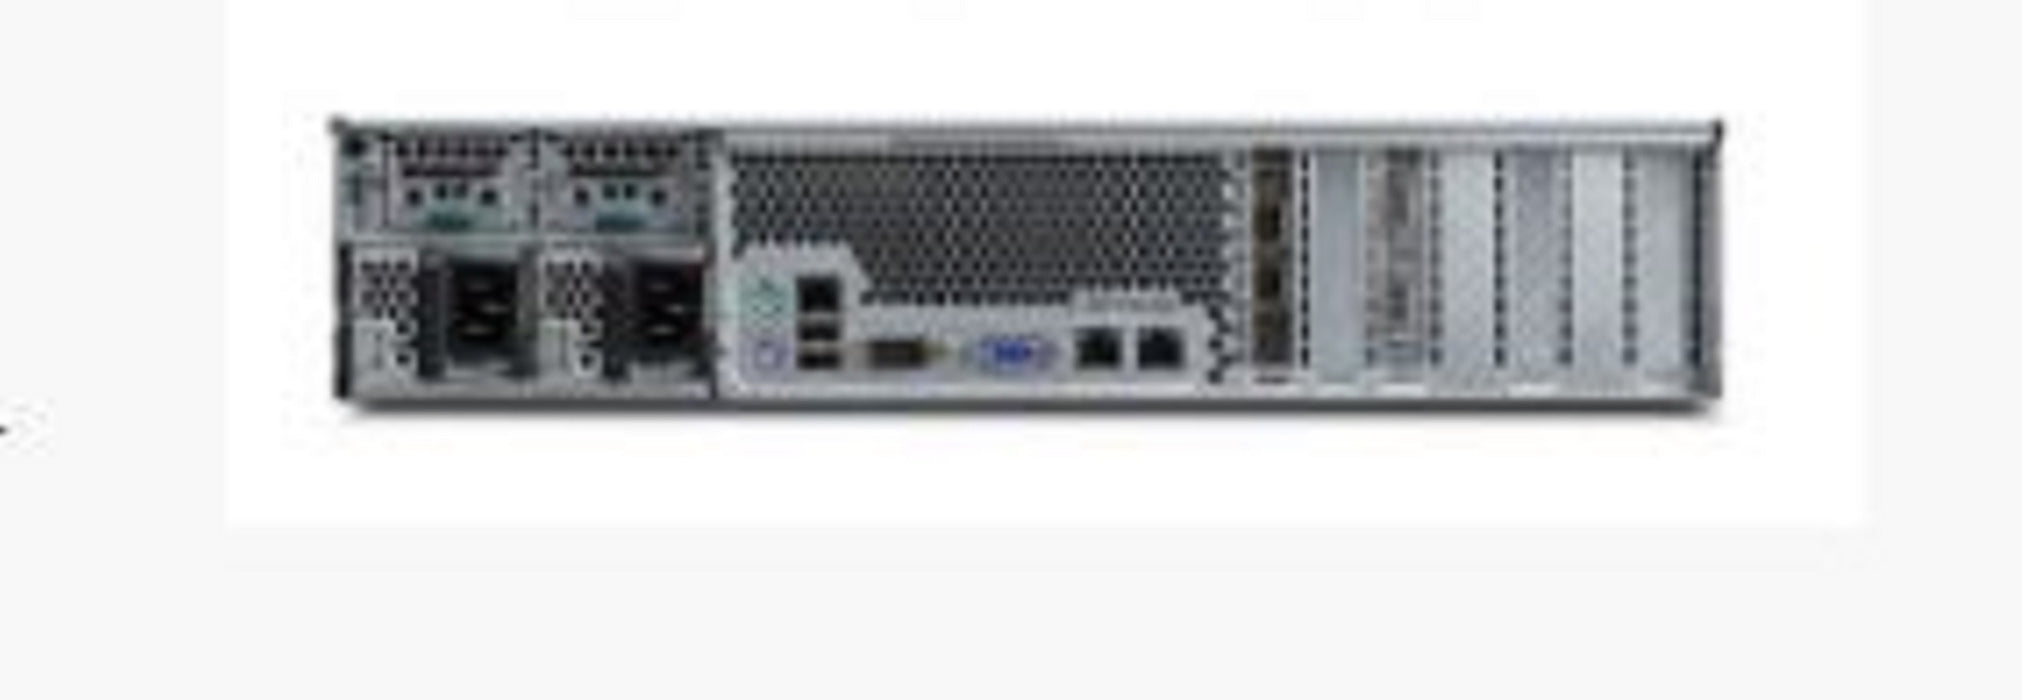 Isilon X200 30TB 5-Node Cluster with 2 x 8-Port Infiniband switches